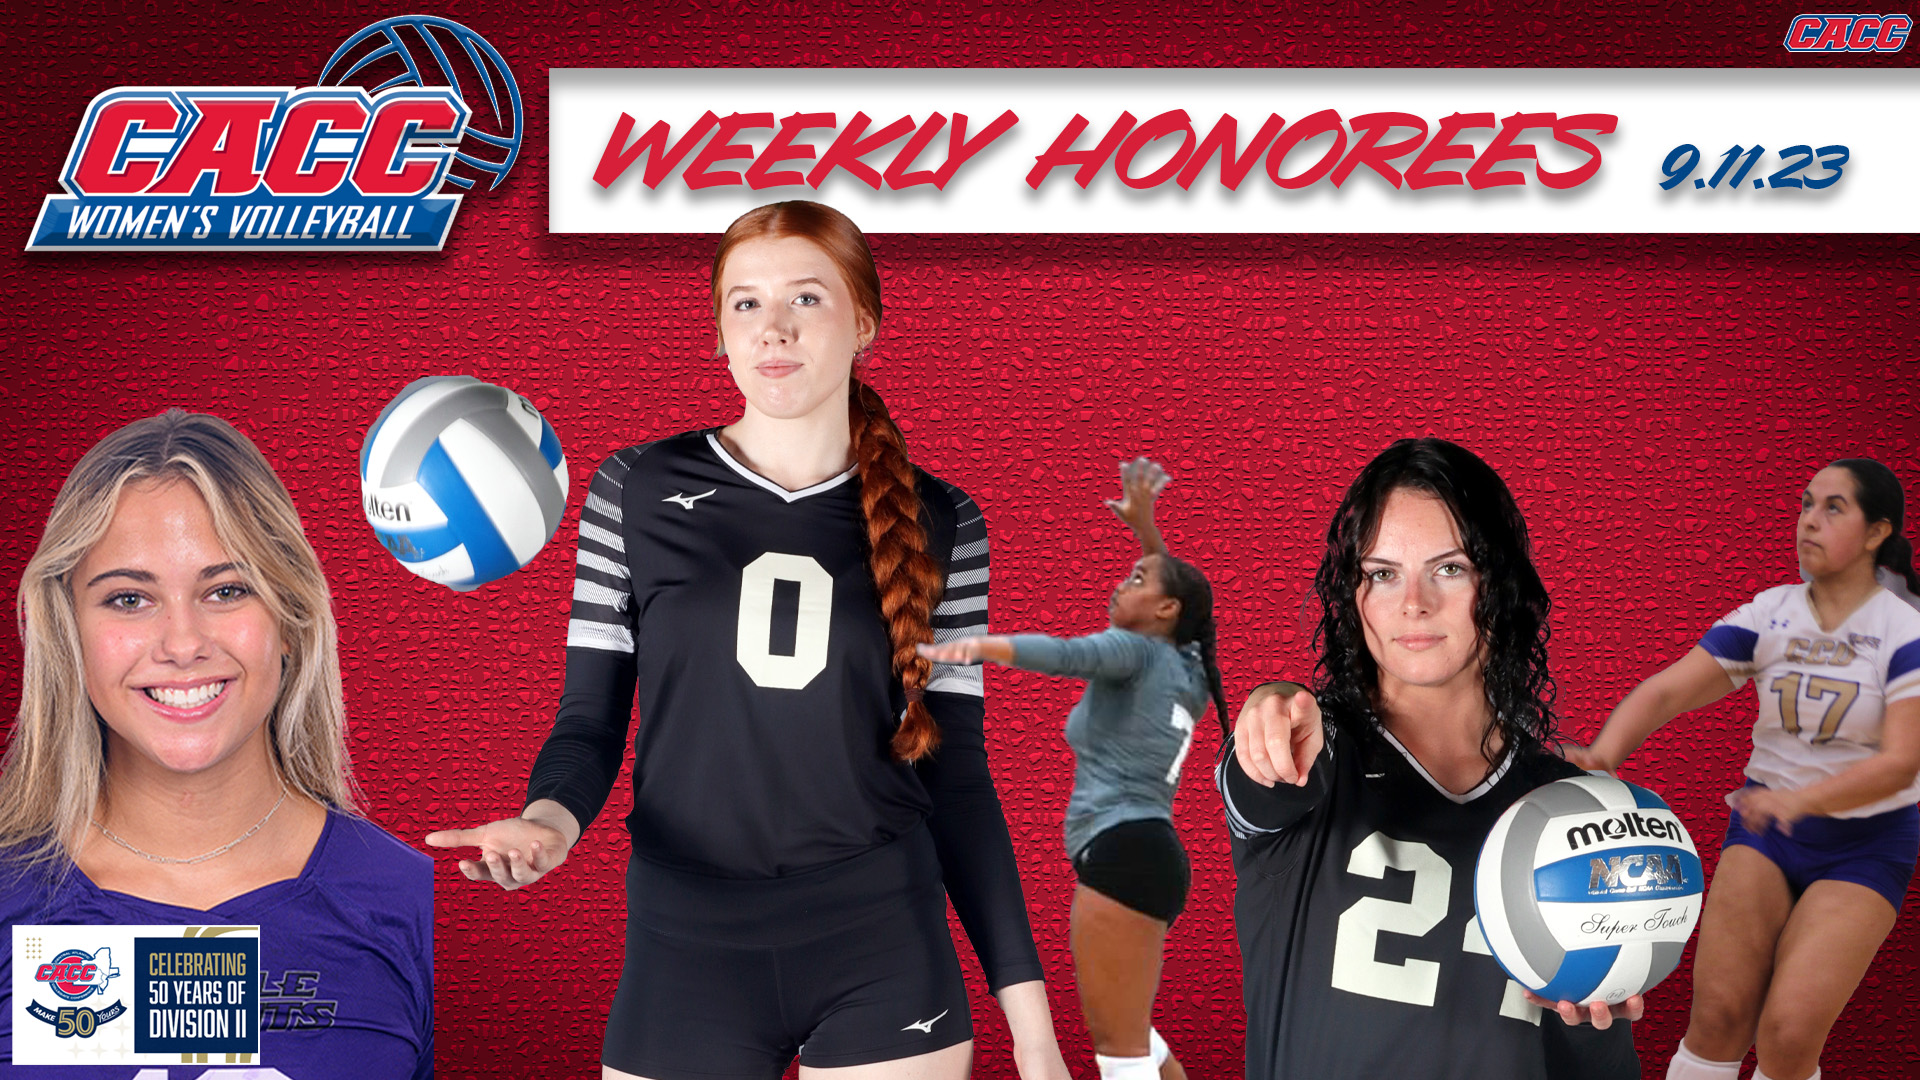 CACC Women's Volleyball Weekly Honorees (9-11-23)